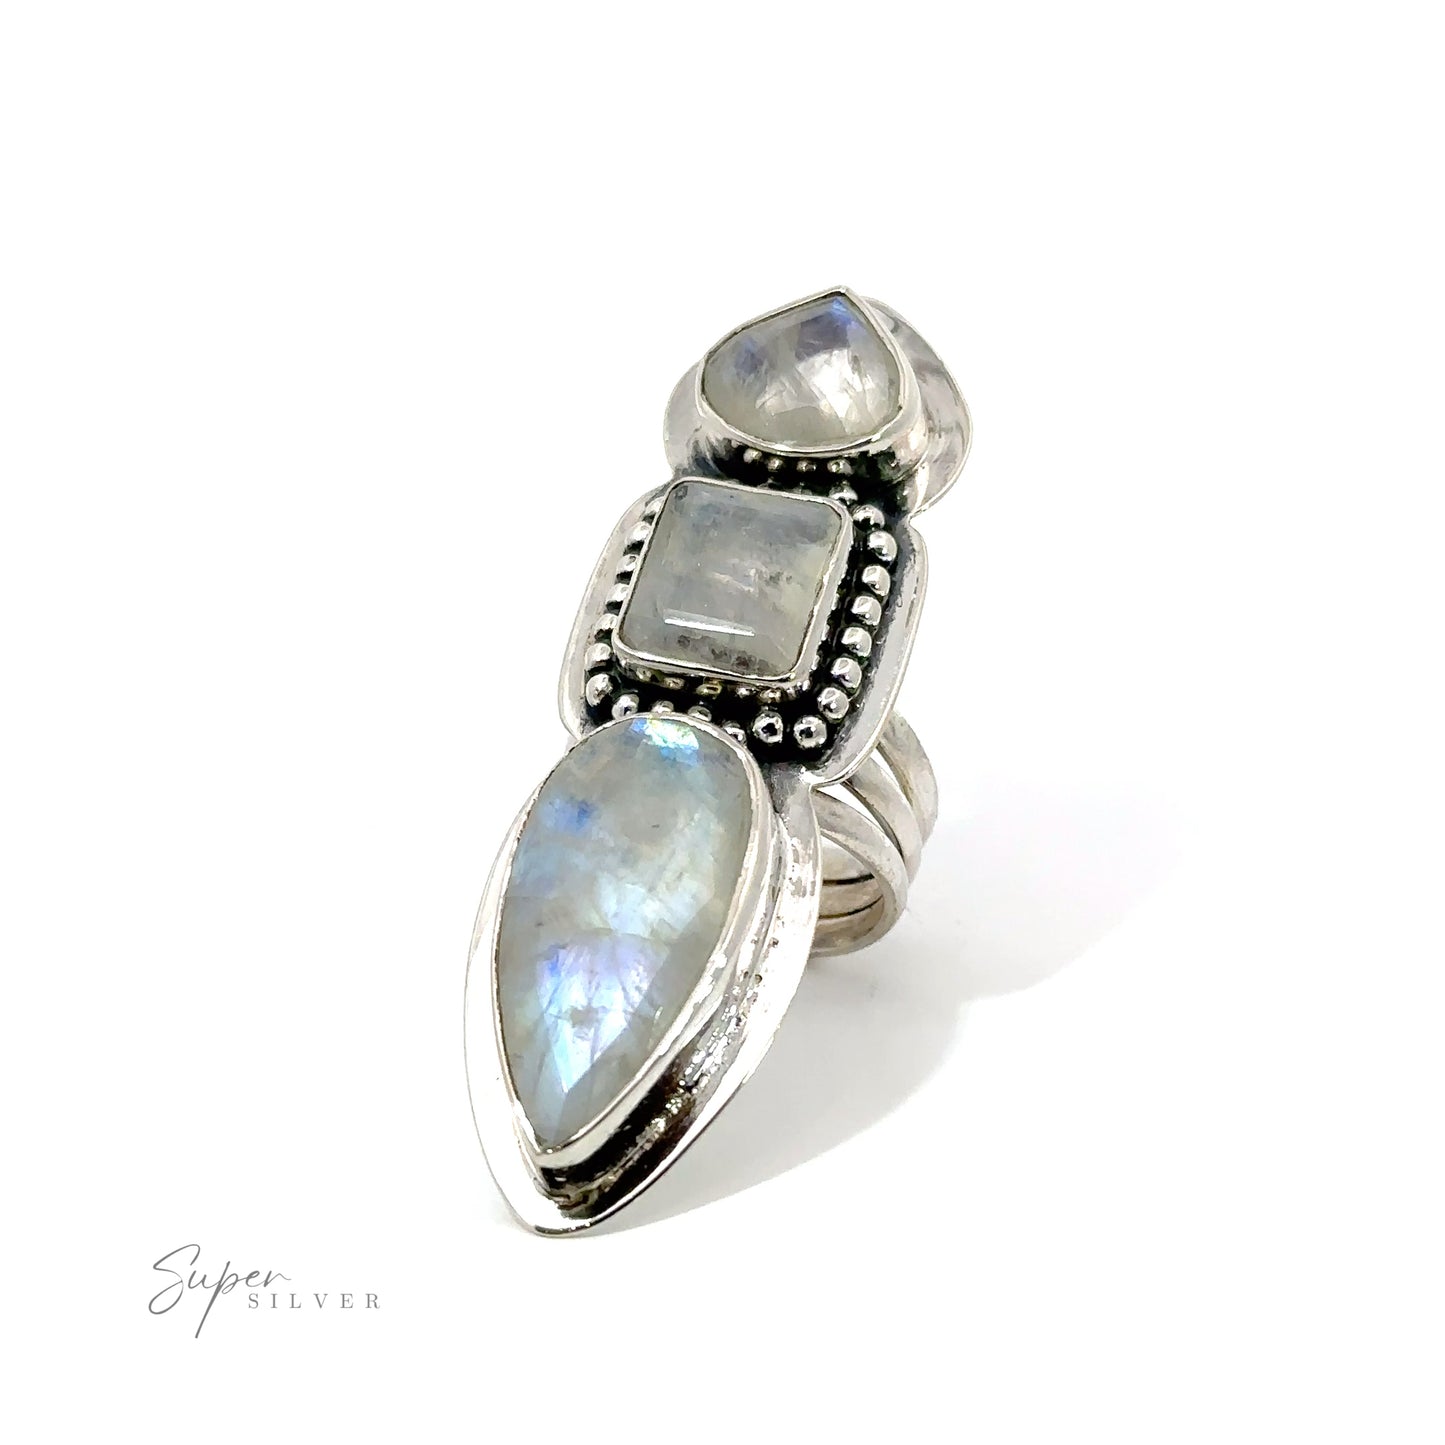 
                  
                    A silver Statement Faceted Moonstone Ring, including a laptop sleeve for added functionality. The adjustable straps ensure a comfortable fit, making this ring an essential accessory.
                  
                